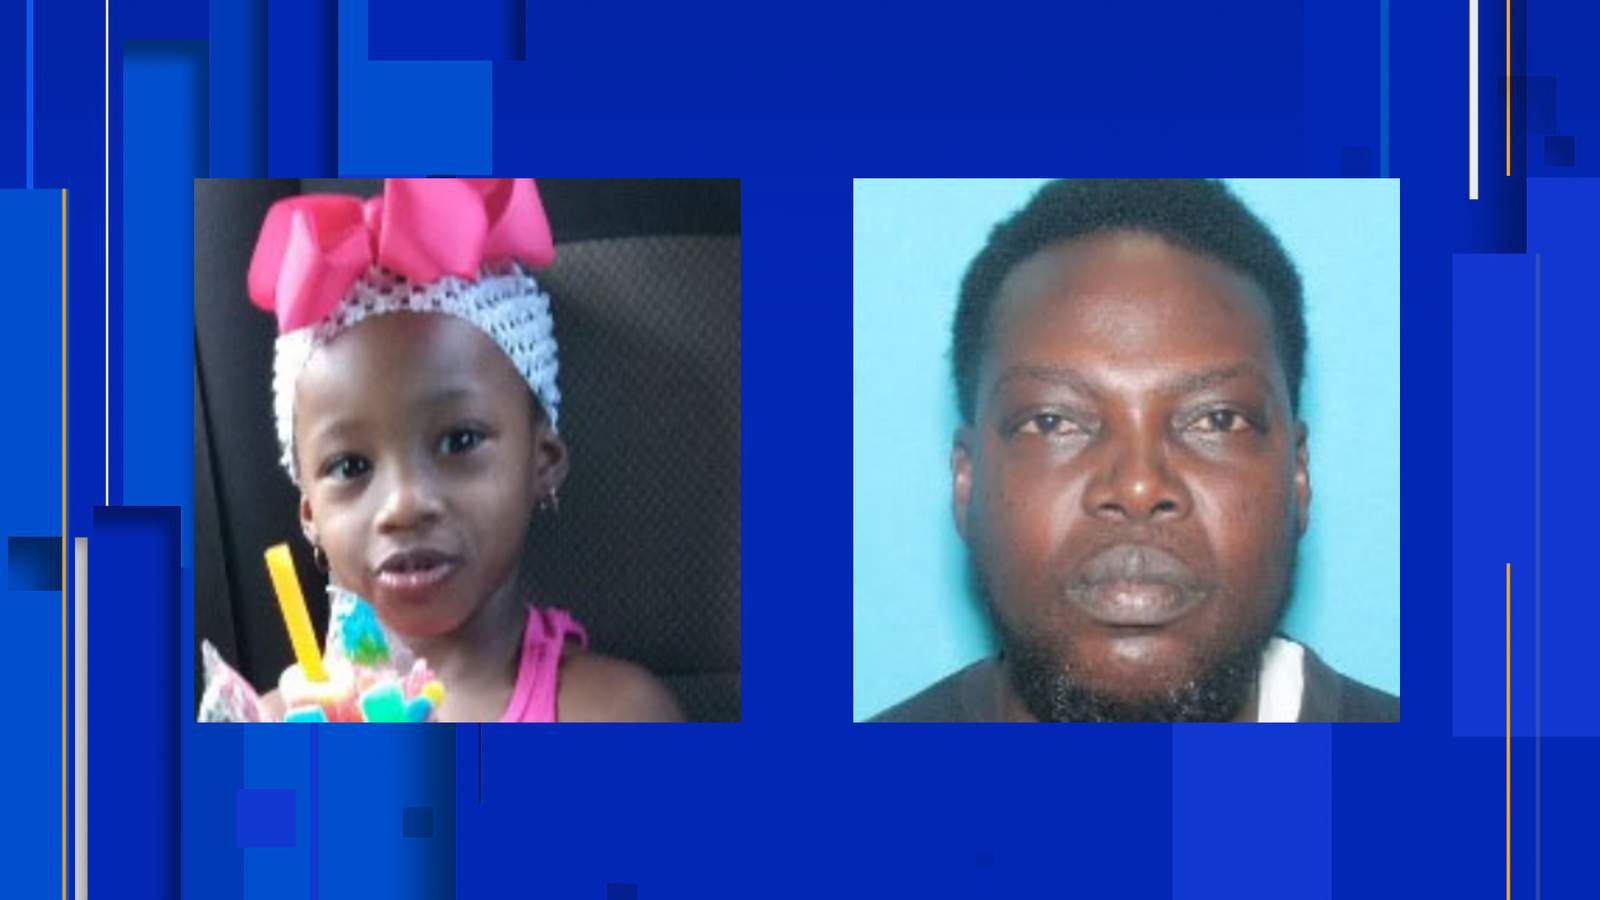 Amber Alert discontinued for missing 3-year-old Texas girl